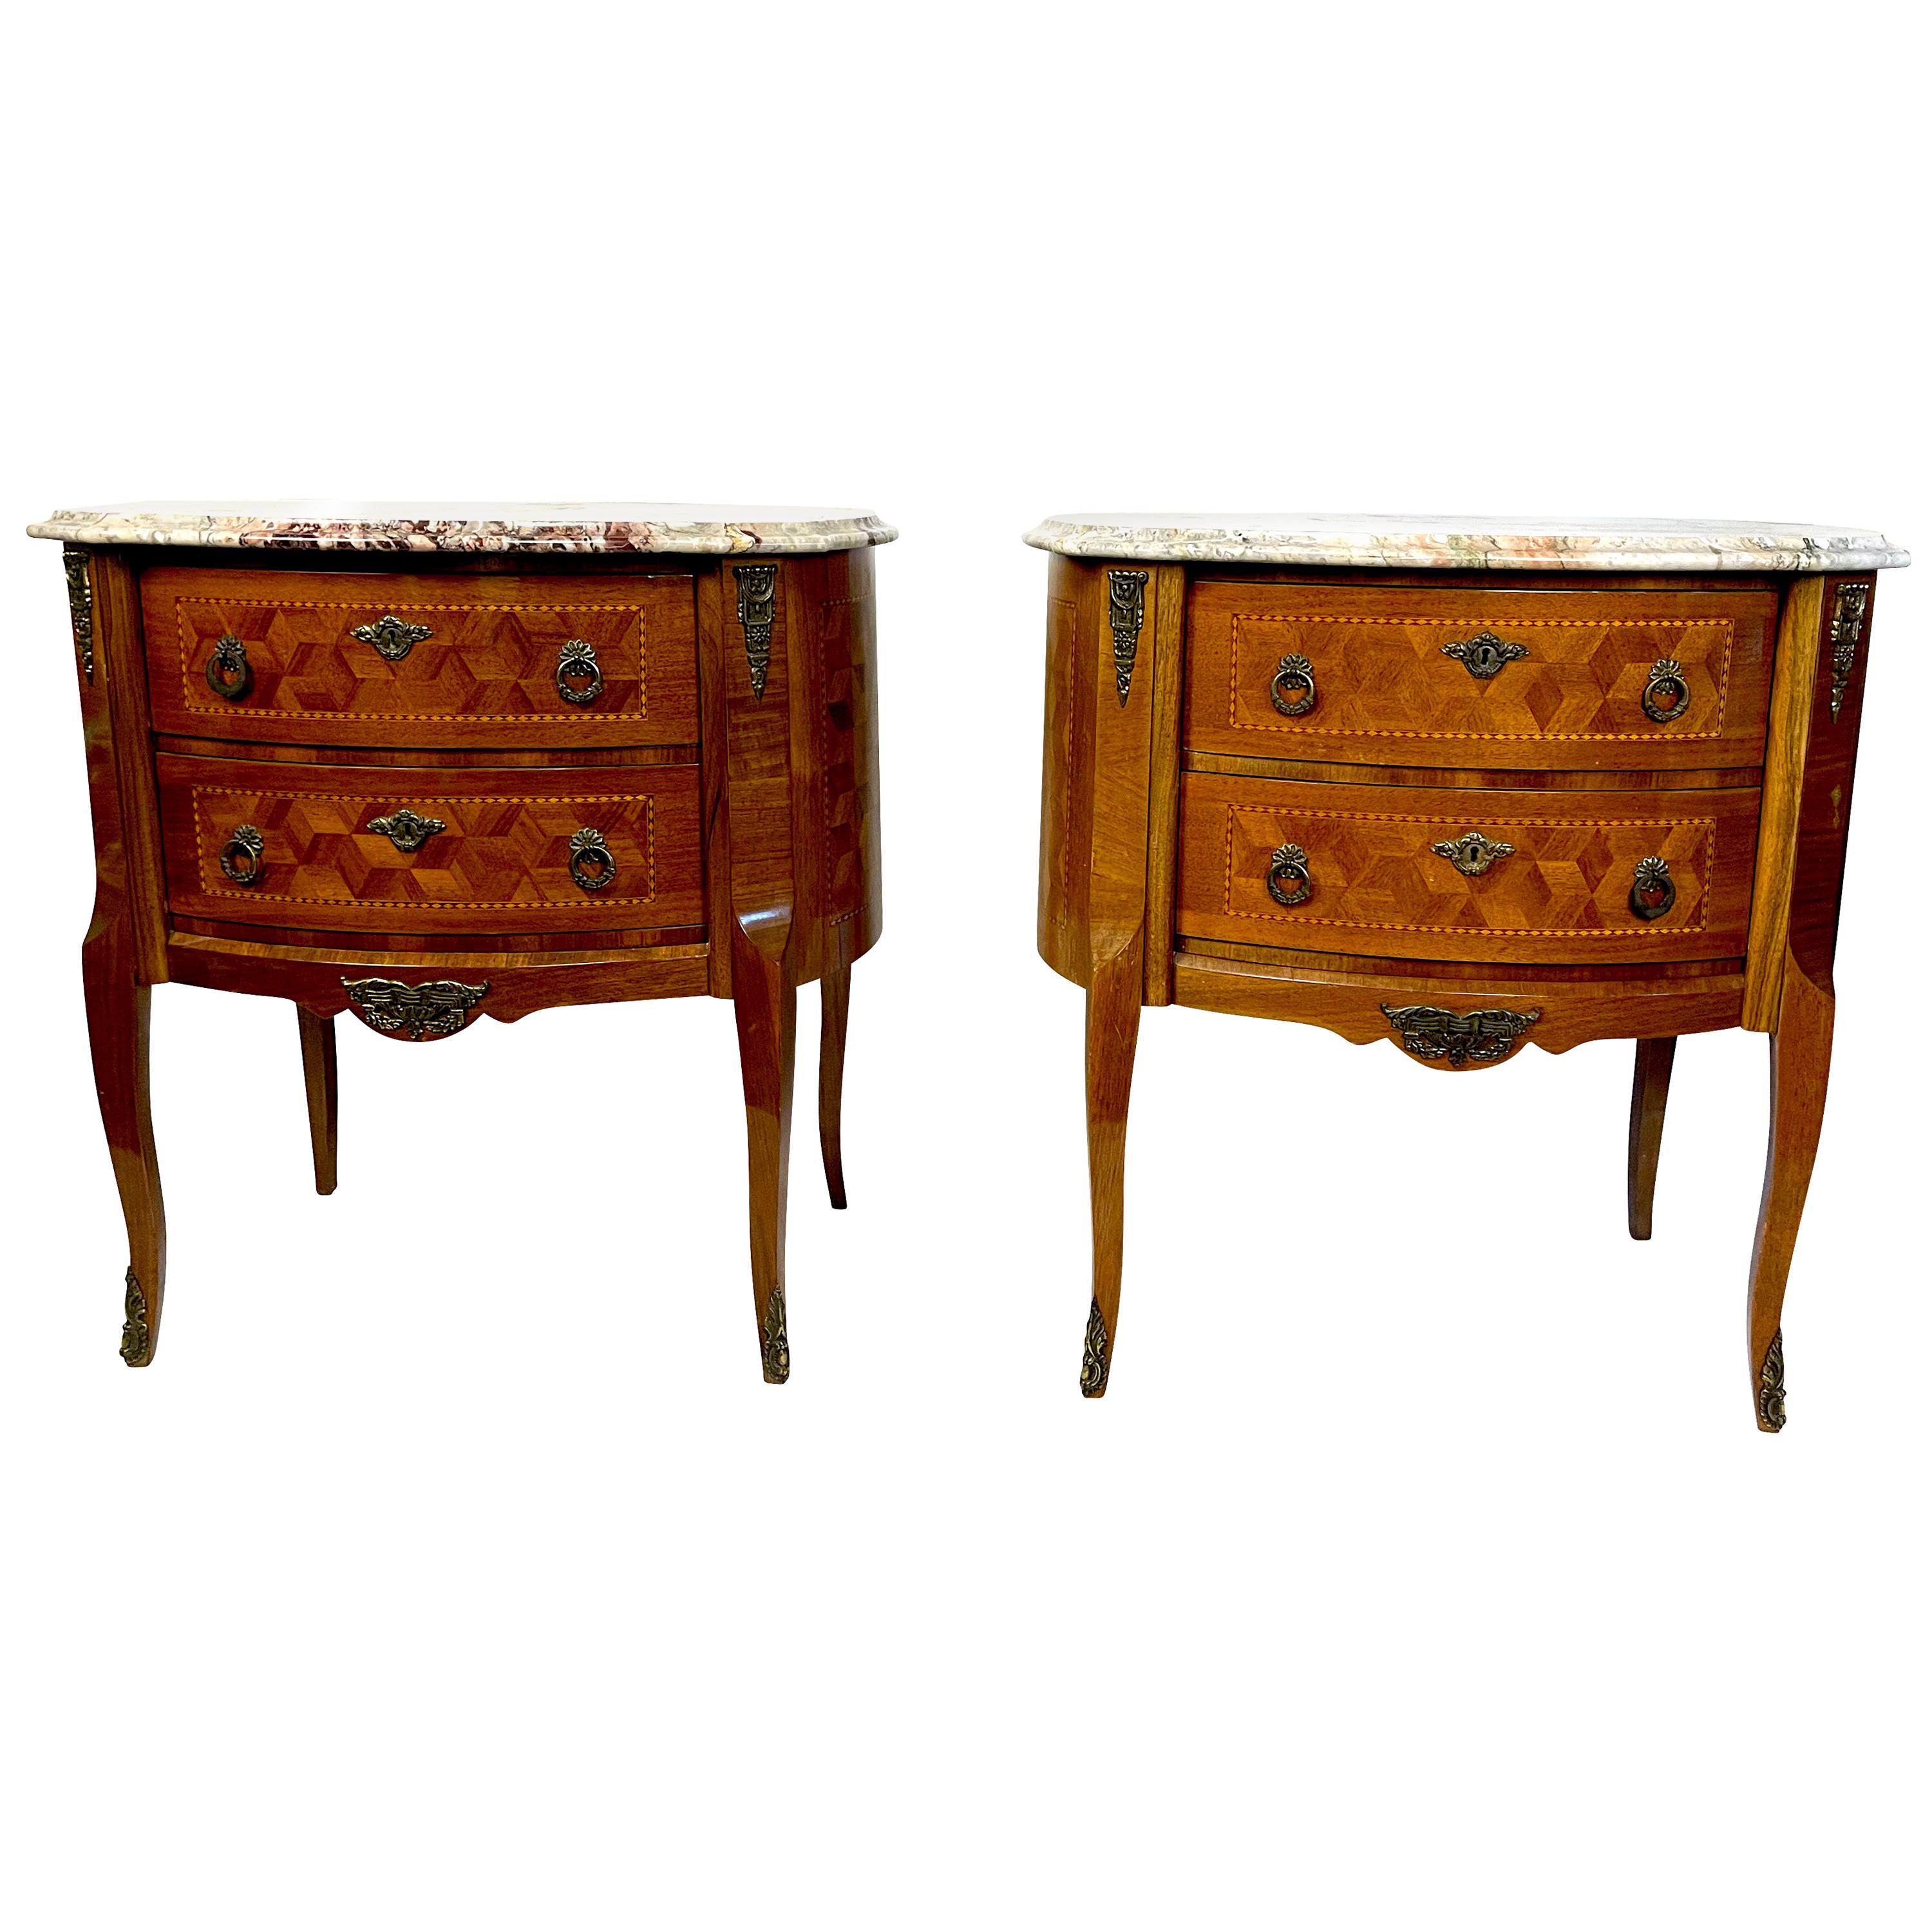 Pair of French Style Louis XV Marquetry Bedroom Side Tables with Marble Tops